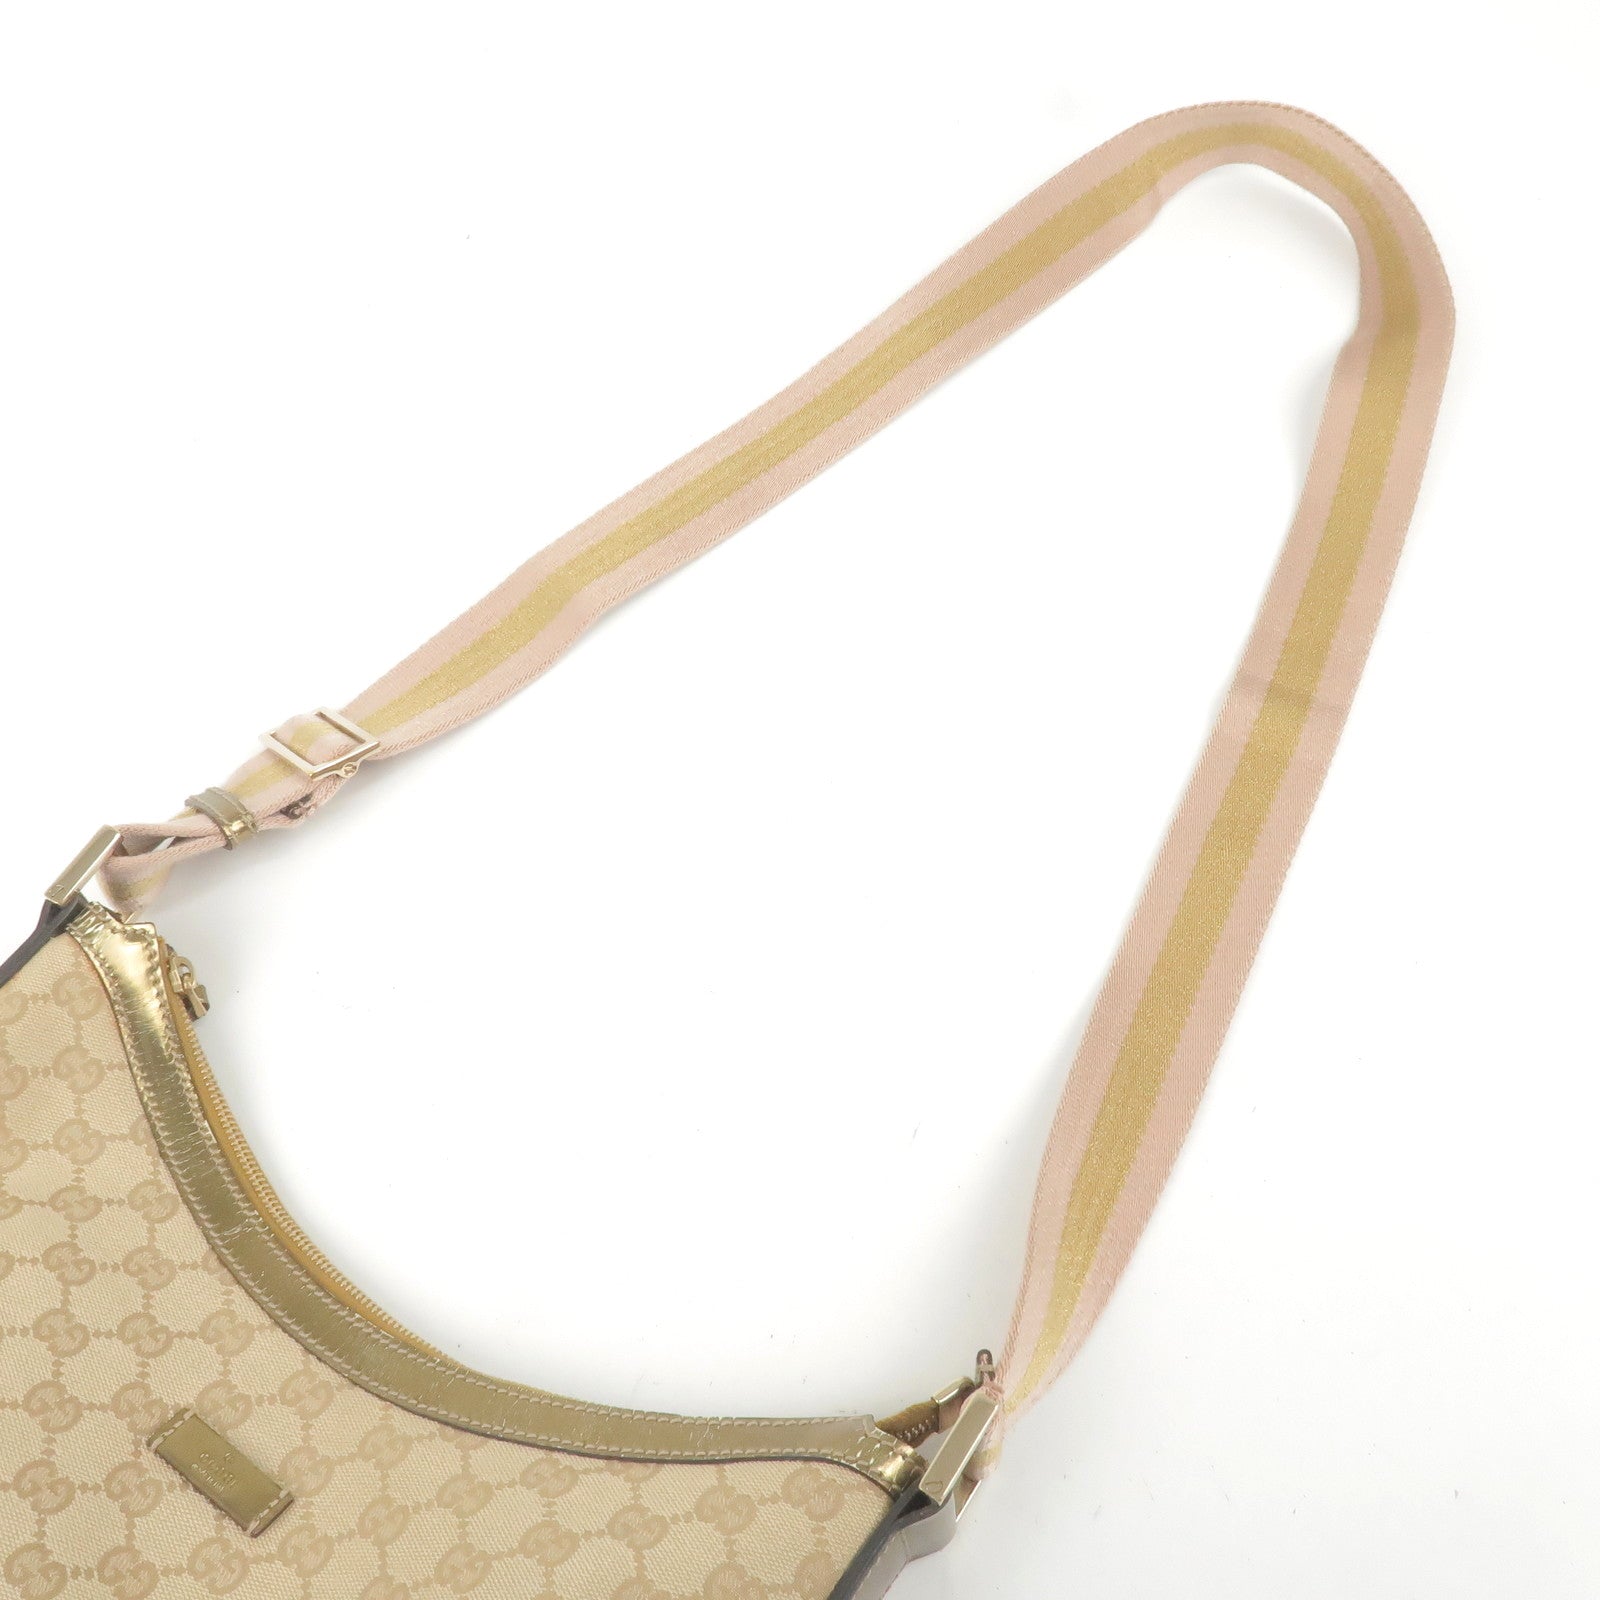 Used Auth Gucci Sherry Line Shoulder Bag 010 378 Women's GG